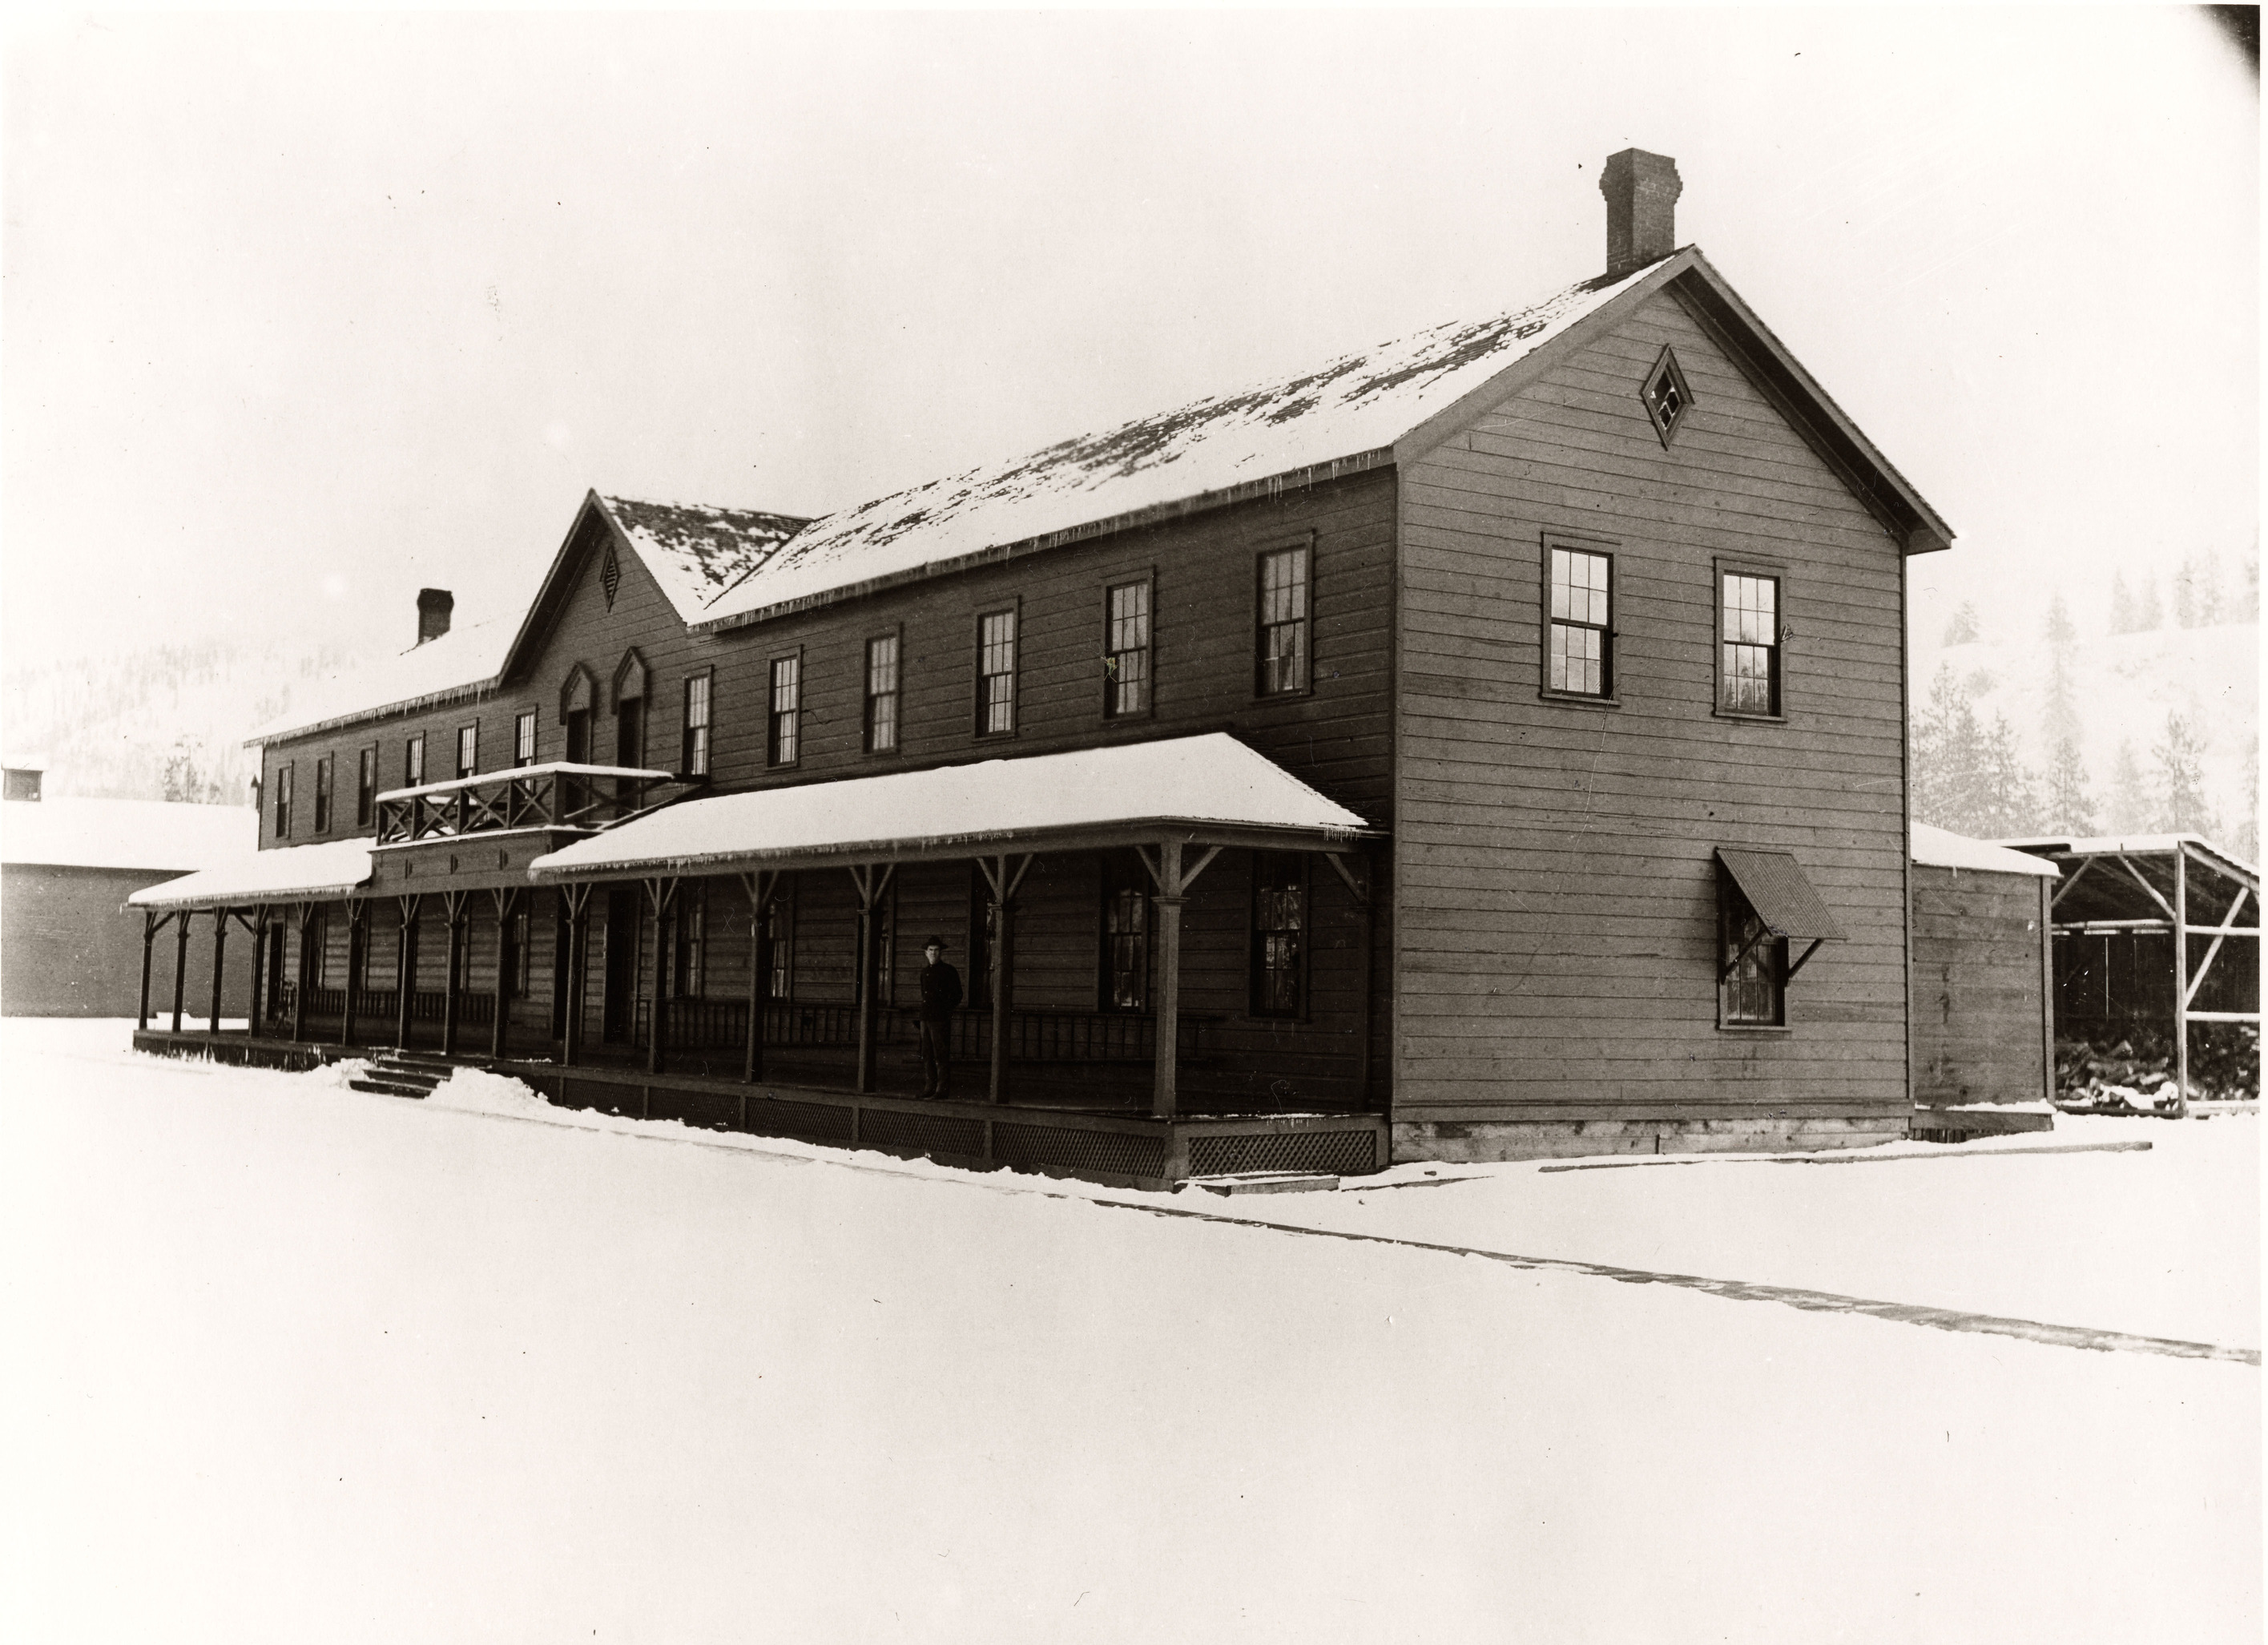 Black and white photograph of multistory long wooden building covered in snow